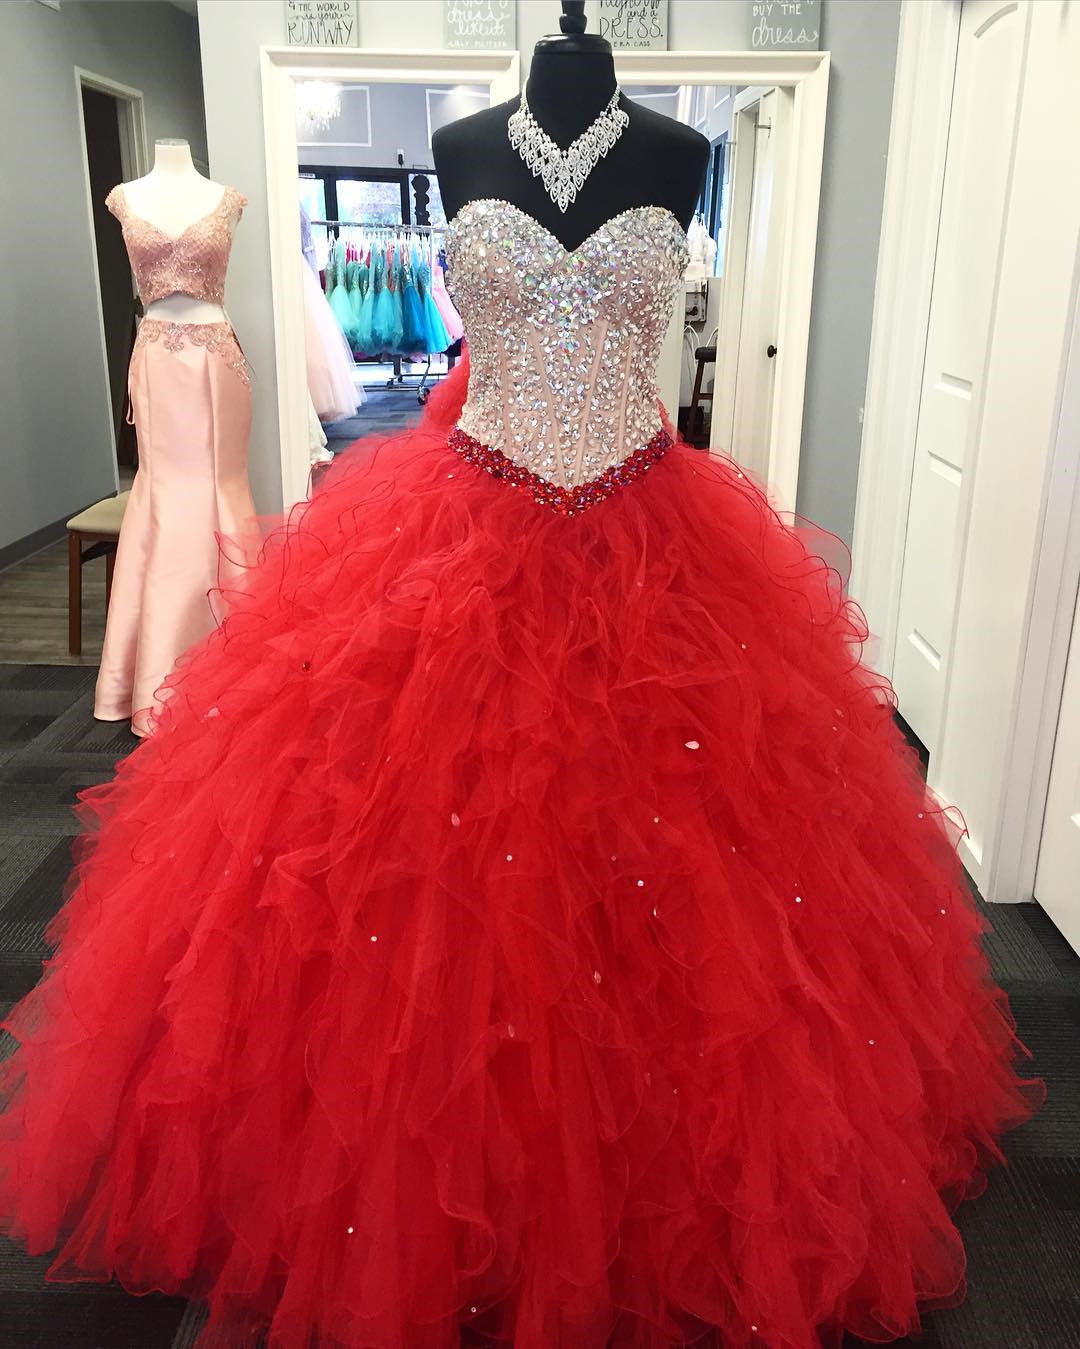 P3503 Princess Prom Ball Gown, Red Quinceanera Dresses, Sweet 16, Rhinestones Prom Dress, Sweet 18 Dresses, Sparkly Prom Dress, Tiered Prom